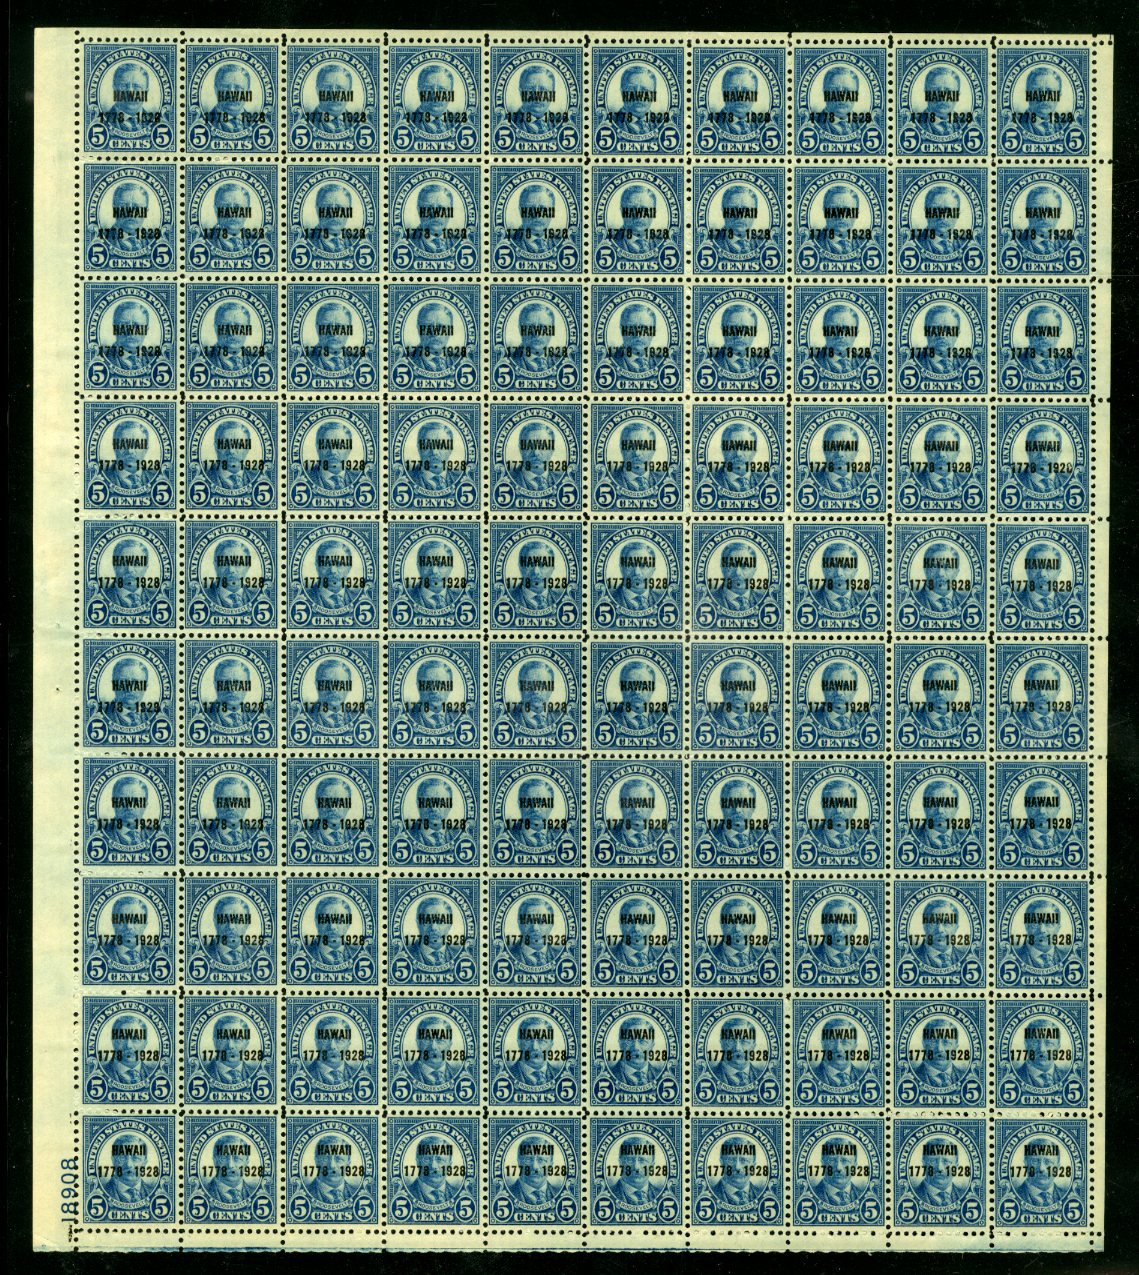 Lot 119 - United States Modern Issues  -  Cherrystone Auctions U.S. & Worldwide Stamps & Postal History